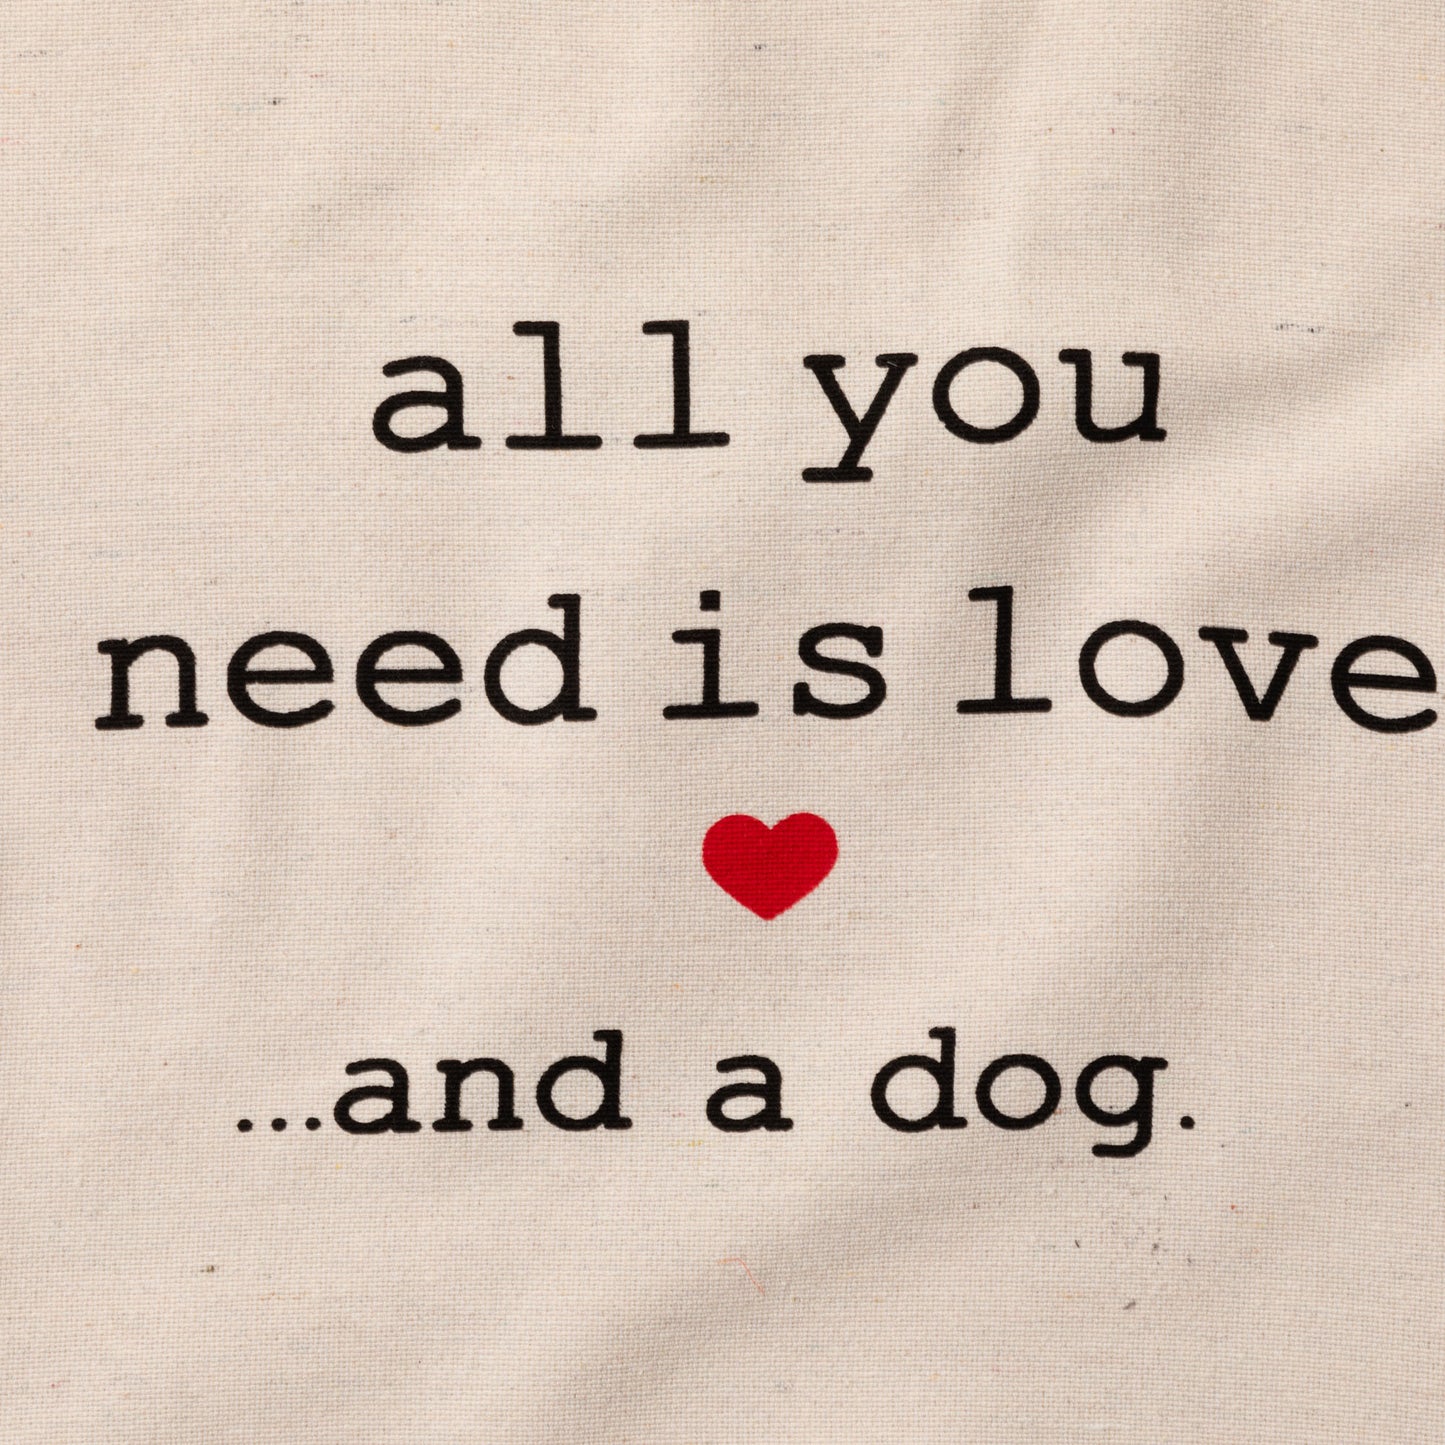 All About Dog Love Tote